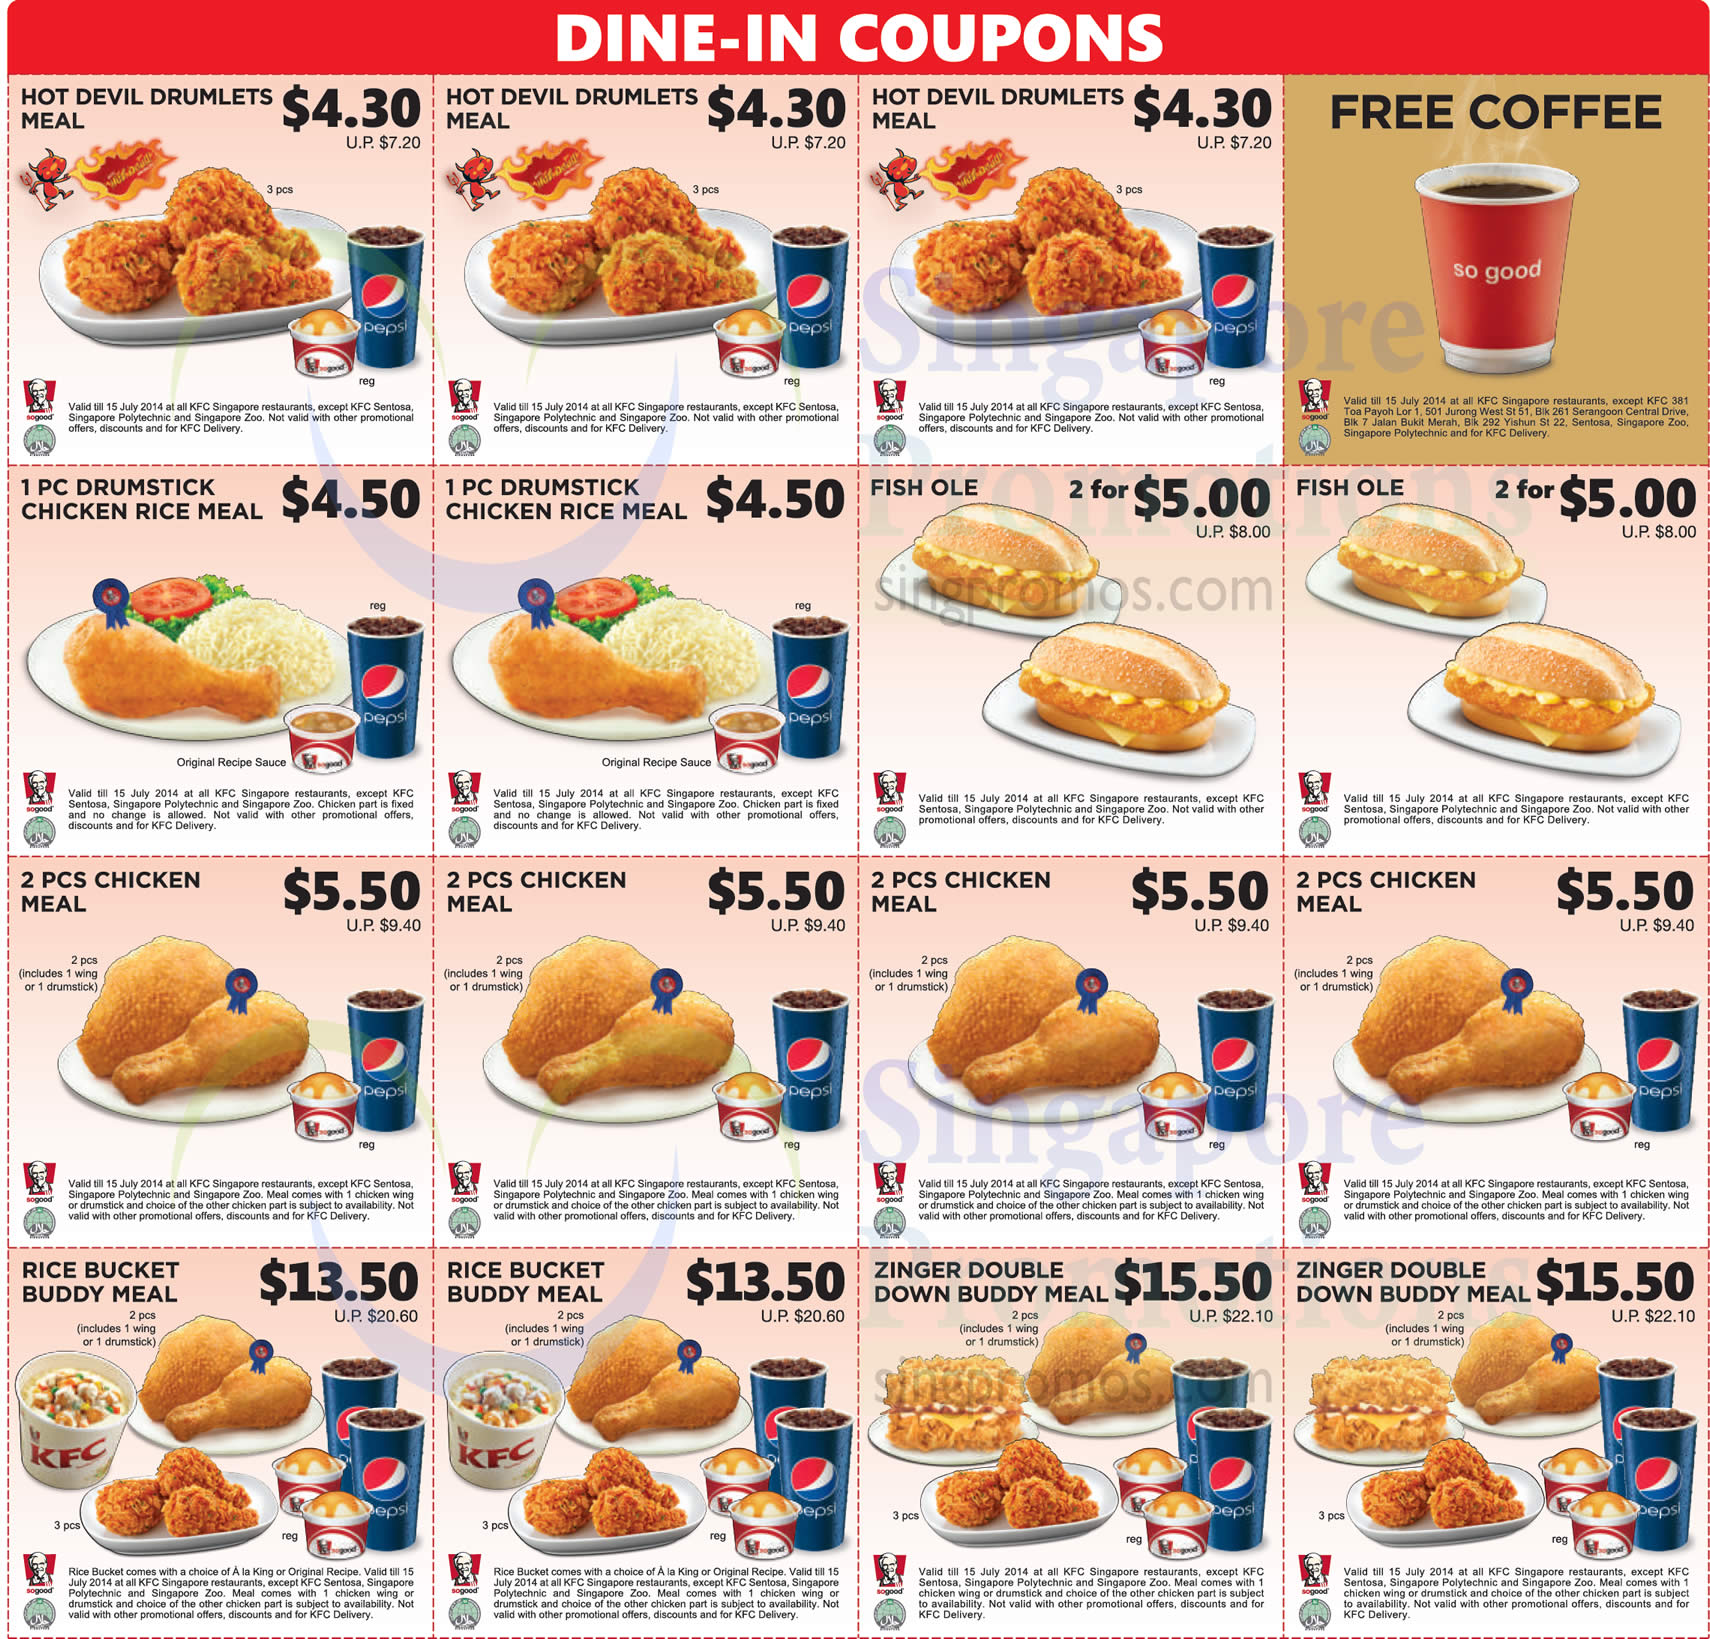 all dine in coupons printable kfc dine in discount coupons free coffee coupon 24 jun 15 jul 2014 singpromos com